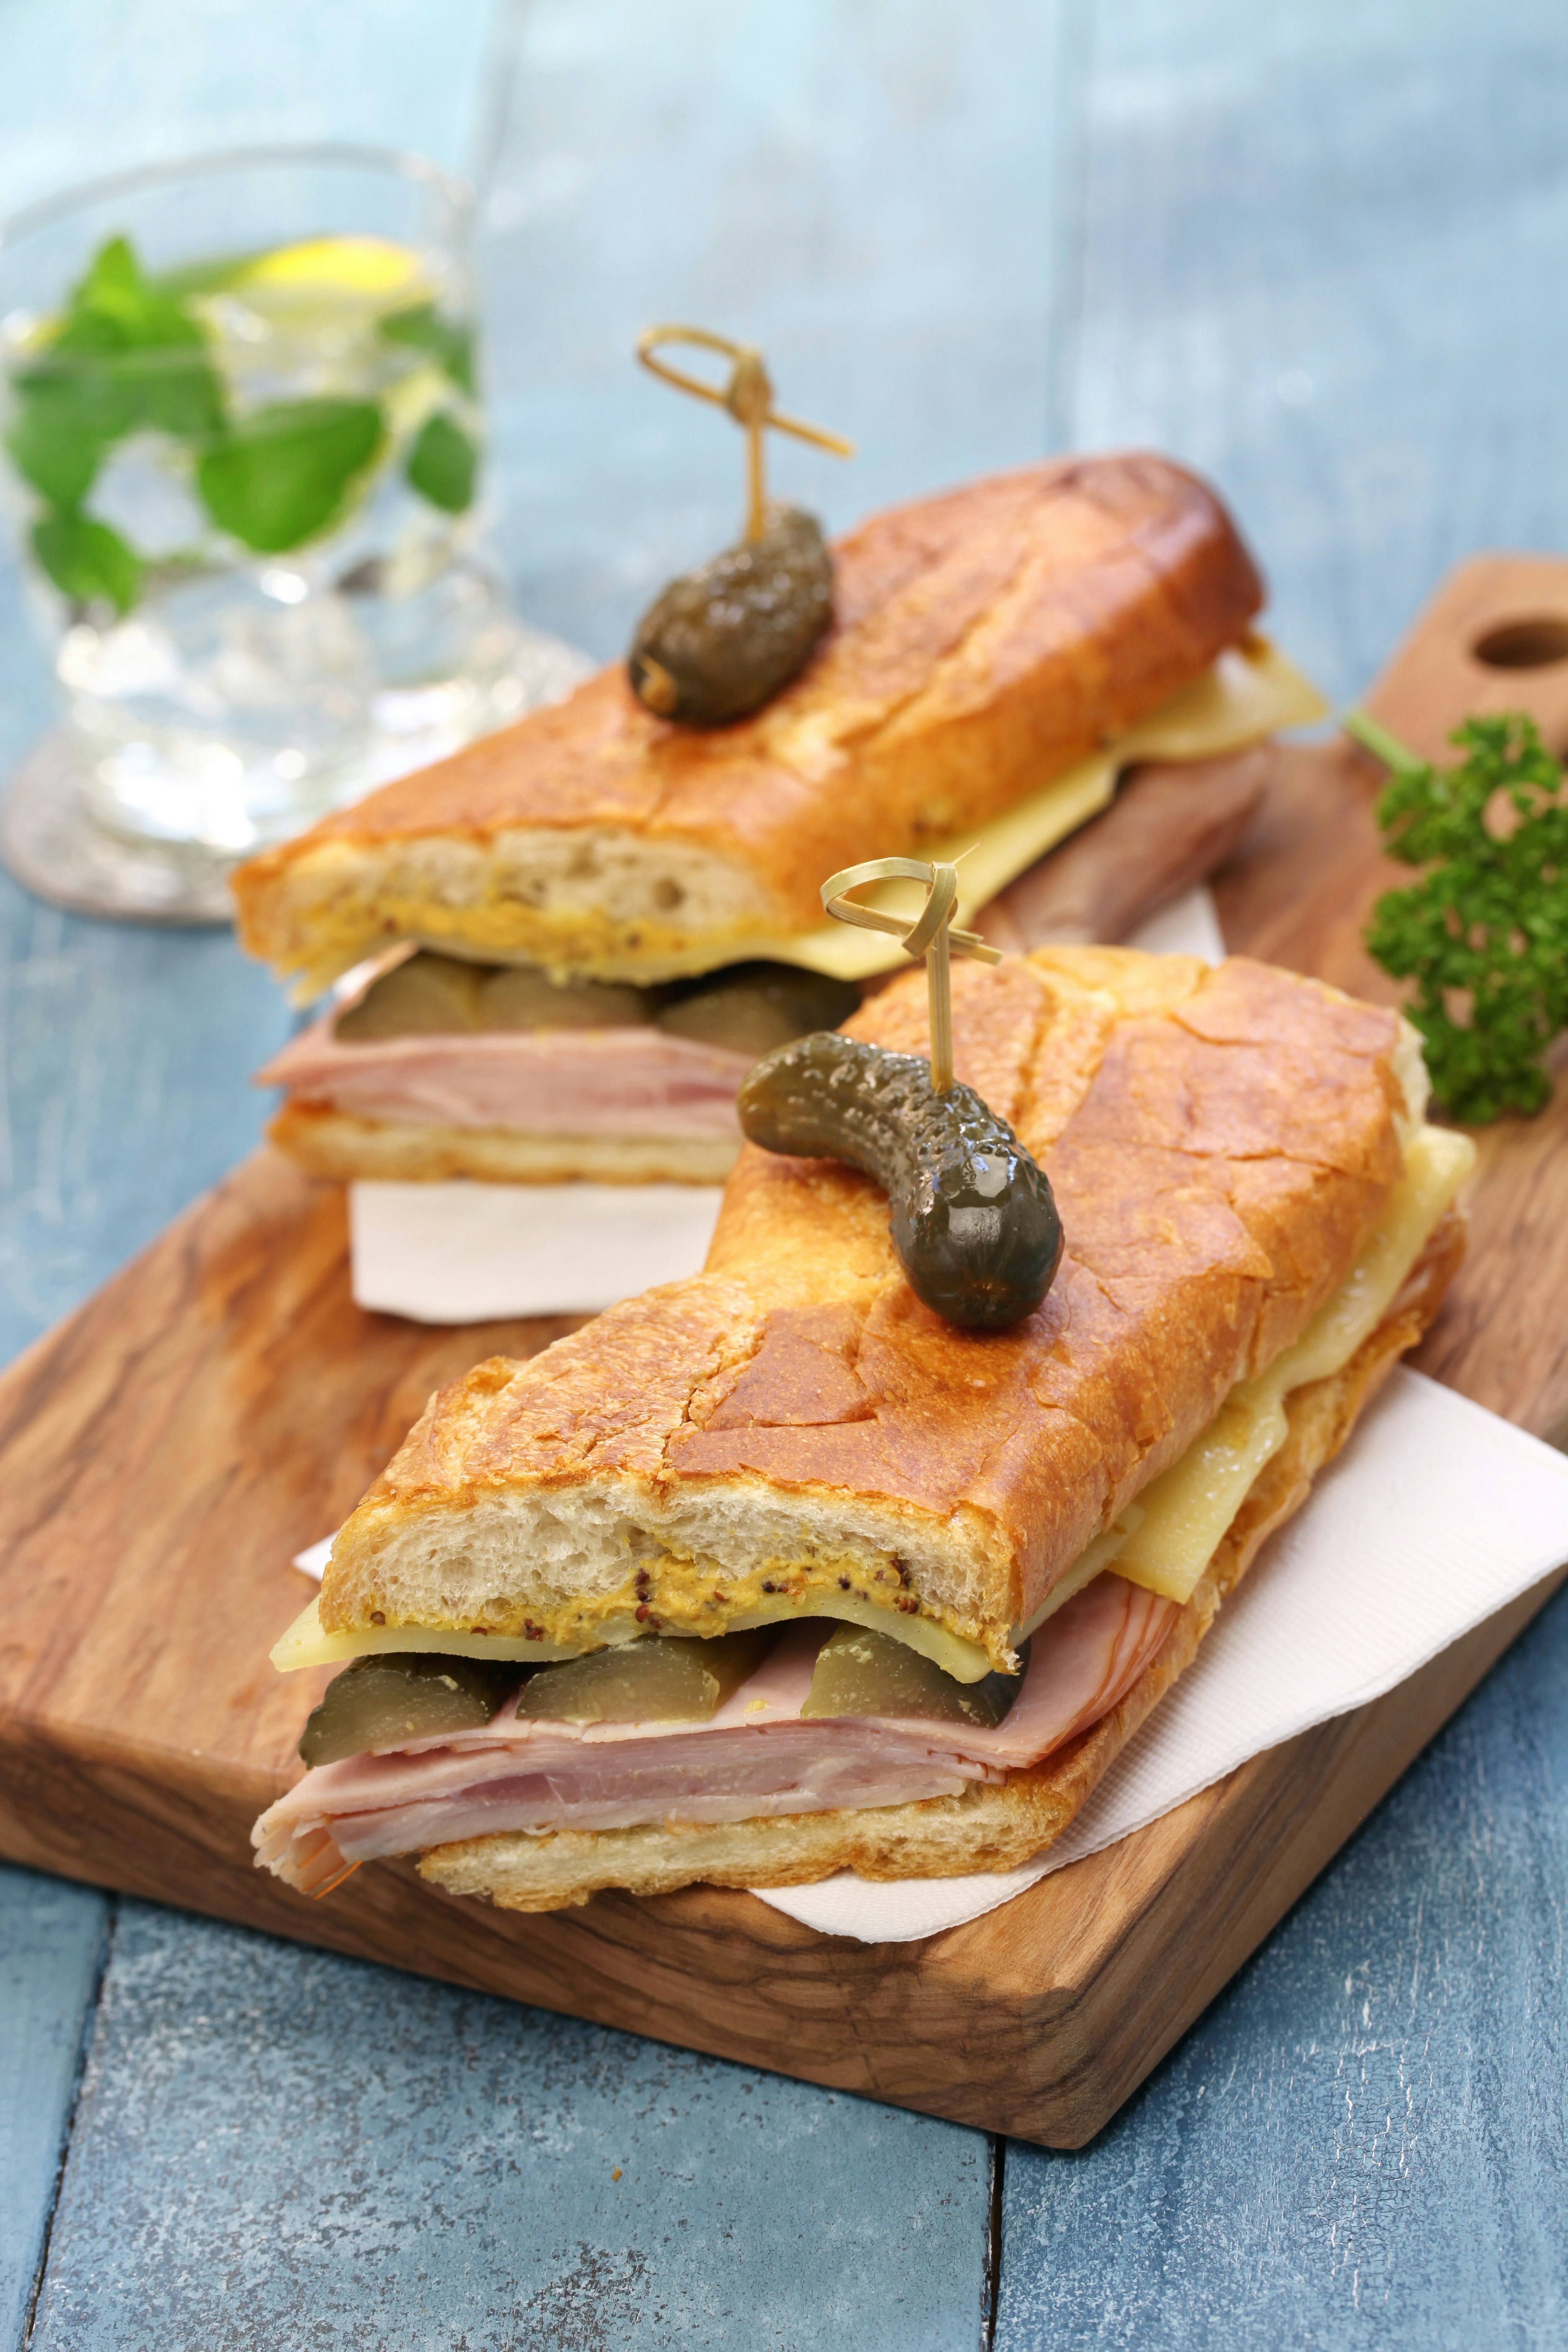 A long pressed sandwich is cut in half and arranged artfully on a chopping board. The sandwich is stuffed with ham, cheese, pork and pickles. A pickle is skewered through each half of the sandwich a wooden stick.